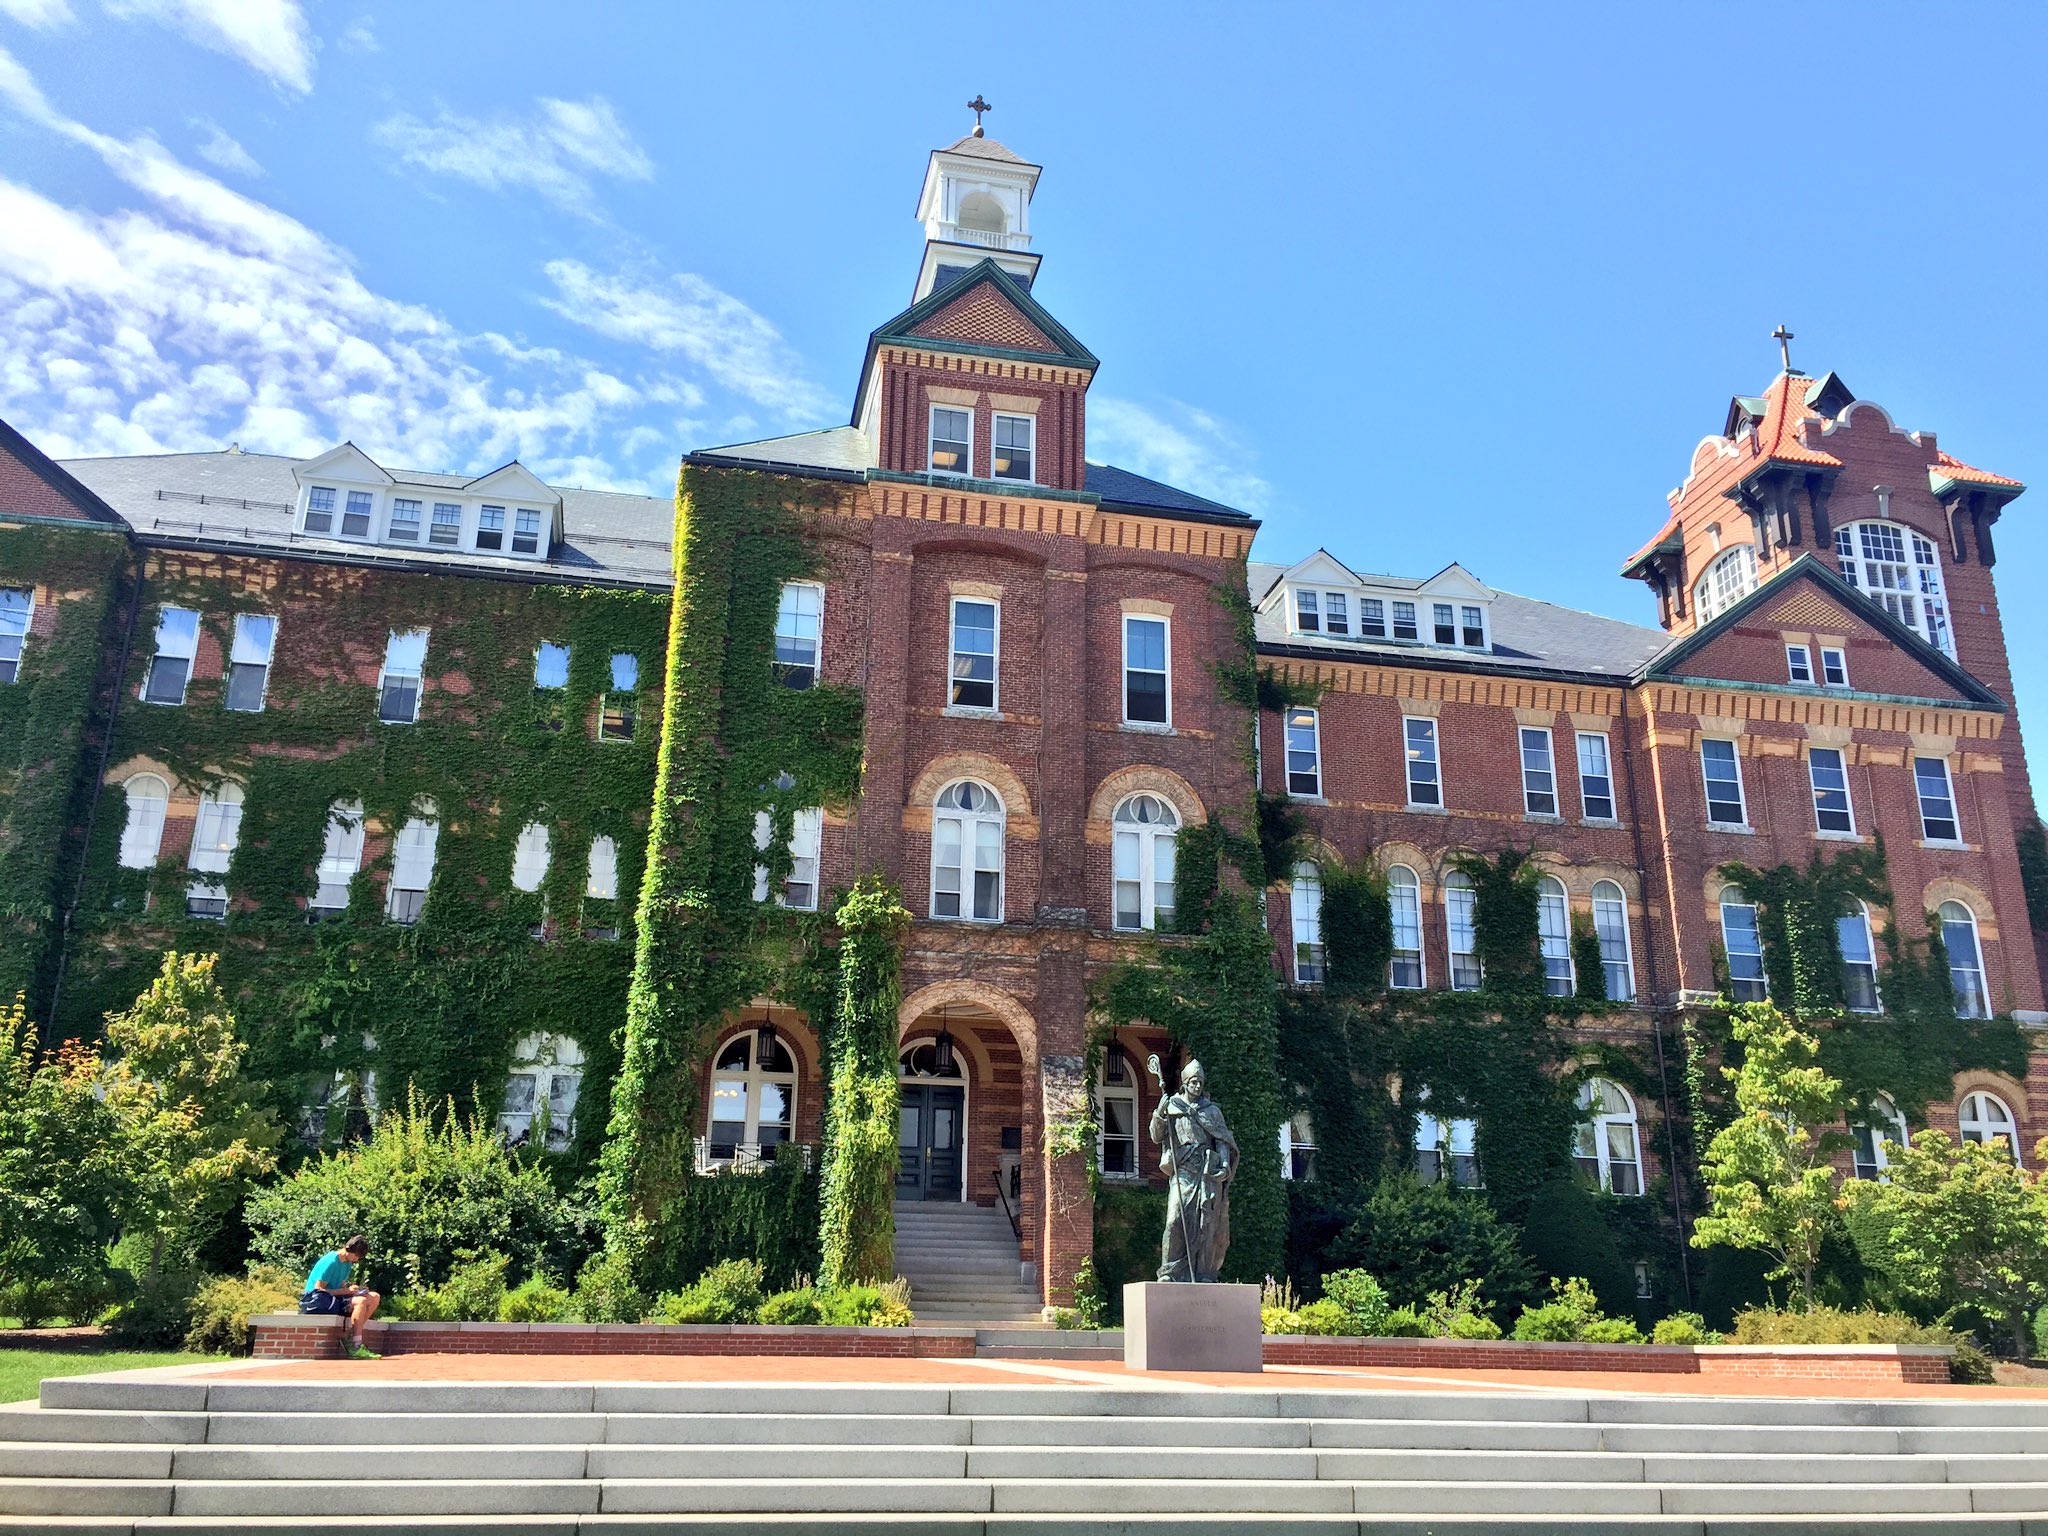 Saint Anselm College on X: "Alumni Hall, looking good on this spectacular  late-summer afternoon. Get outside and enjoy! https://t.co/U5yawR3BeN" / X